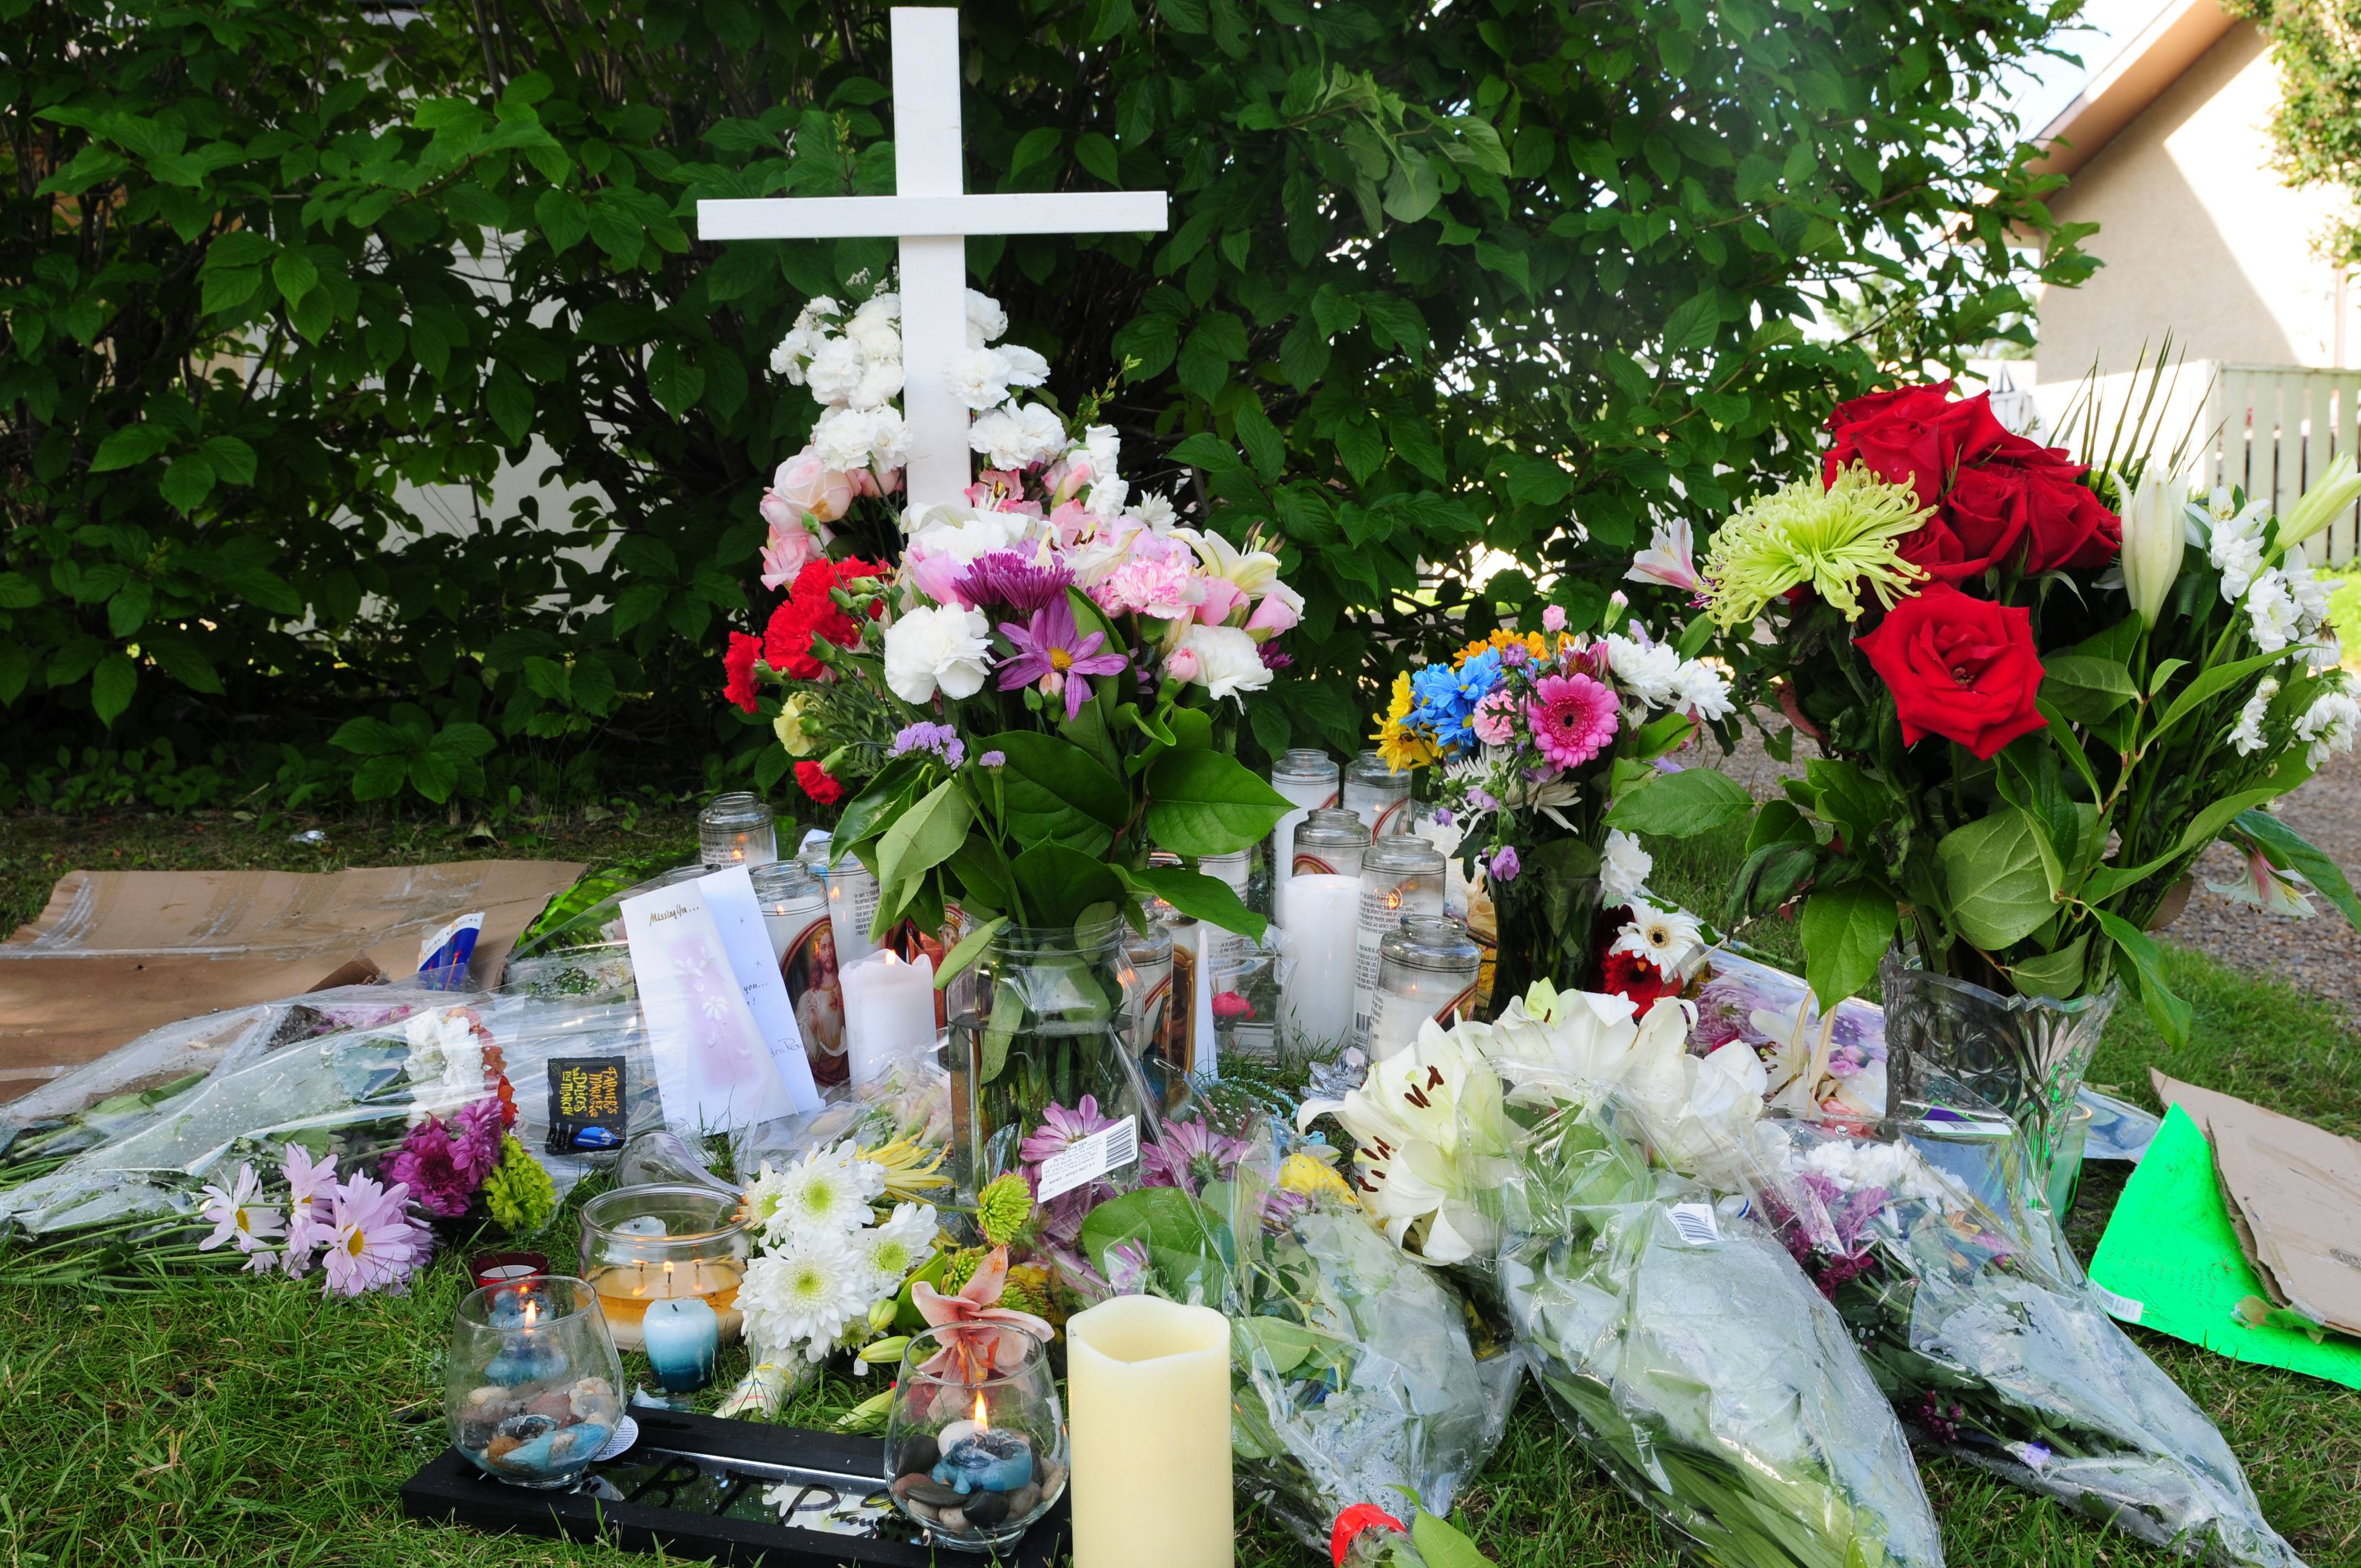 TRAGIC DEATH- Dozens of flowers have been left at the site where 22- year-old Oscar Salazar of Red Deer was shot and killed while in a vehicle early Tuesday evening. On Aug. 2 at 7:05 p.m. RCMP were called after reported shots were fired in the back alley of 63 St. behind the Cornerstone Gospel Chapel. Salazar was pronounced dead on the scene and an 18-year-old male who was also in the vehicle was taken to hospital. No arrests have been made and RCMP continue to investigate.